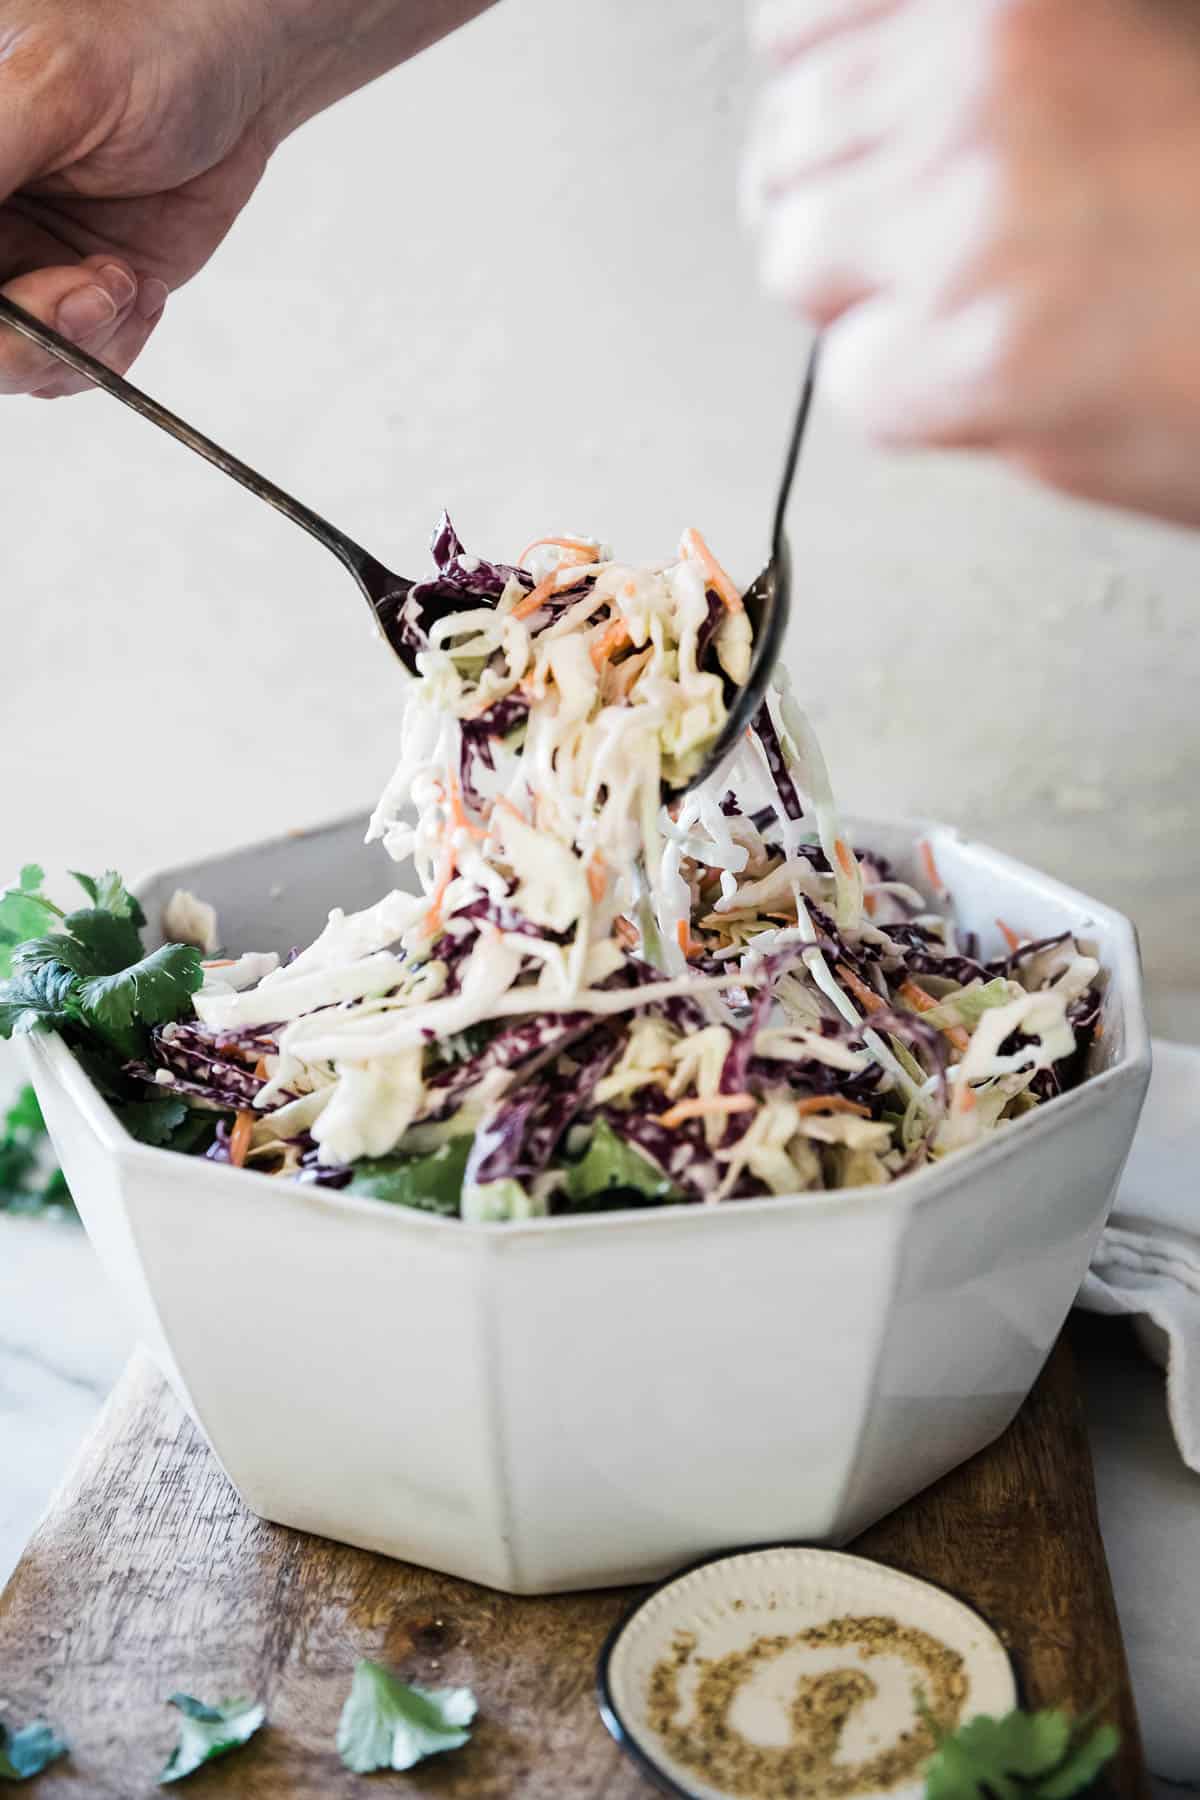 Blue cheese coleslaw being tossed.